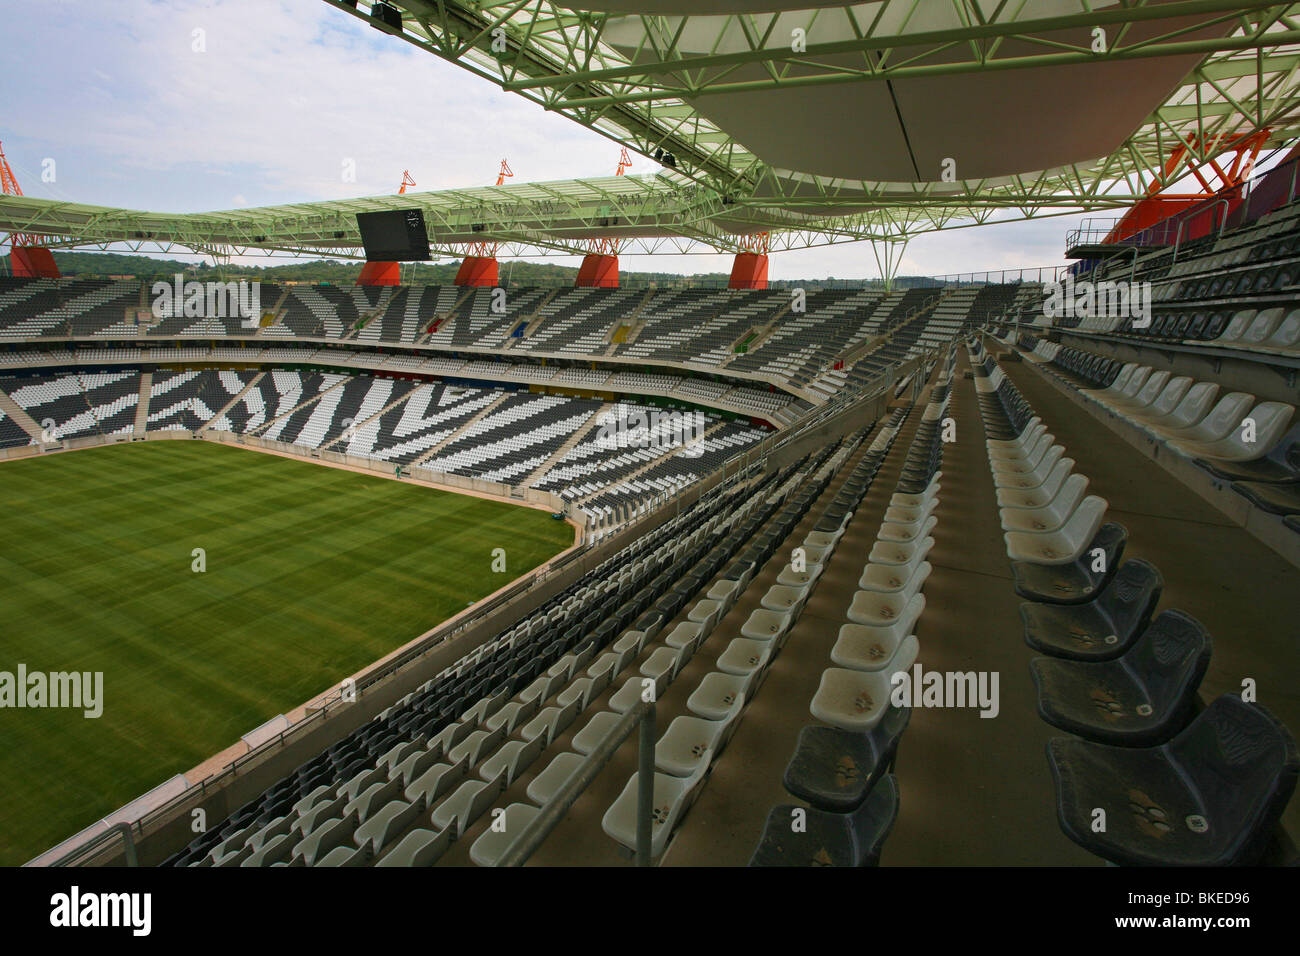 Interior of the Mbombela stadium In Nelspruit  showing the zebra-striped seating an a lush, green, playing surface Stock Photo